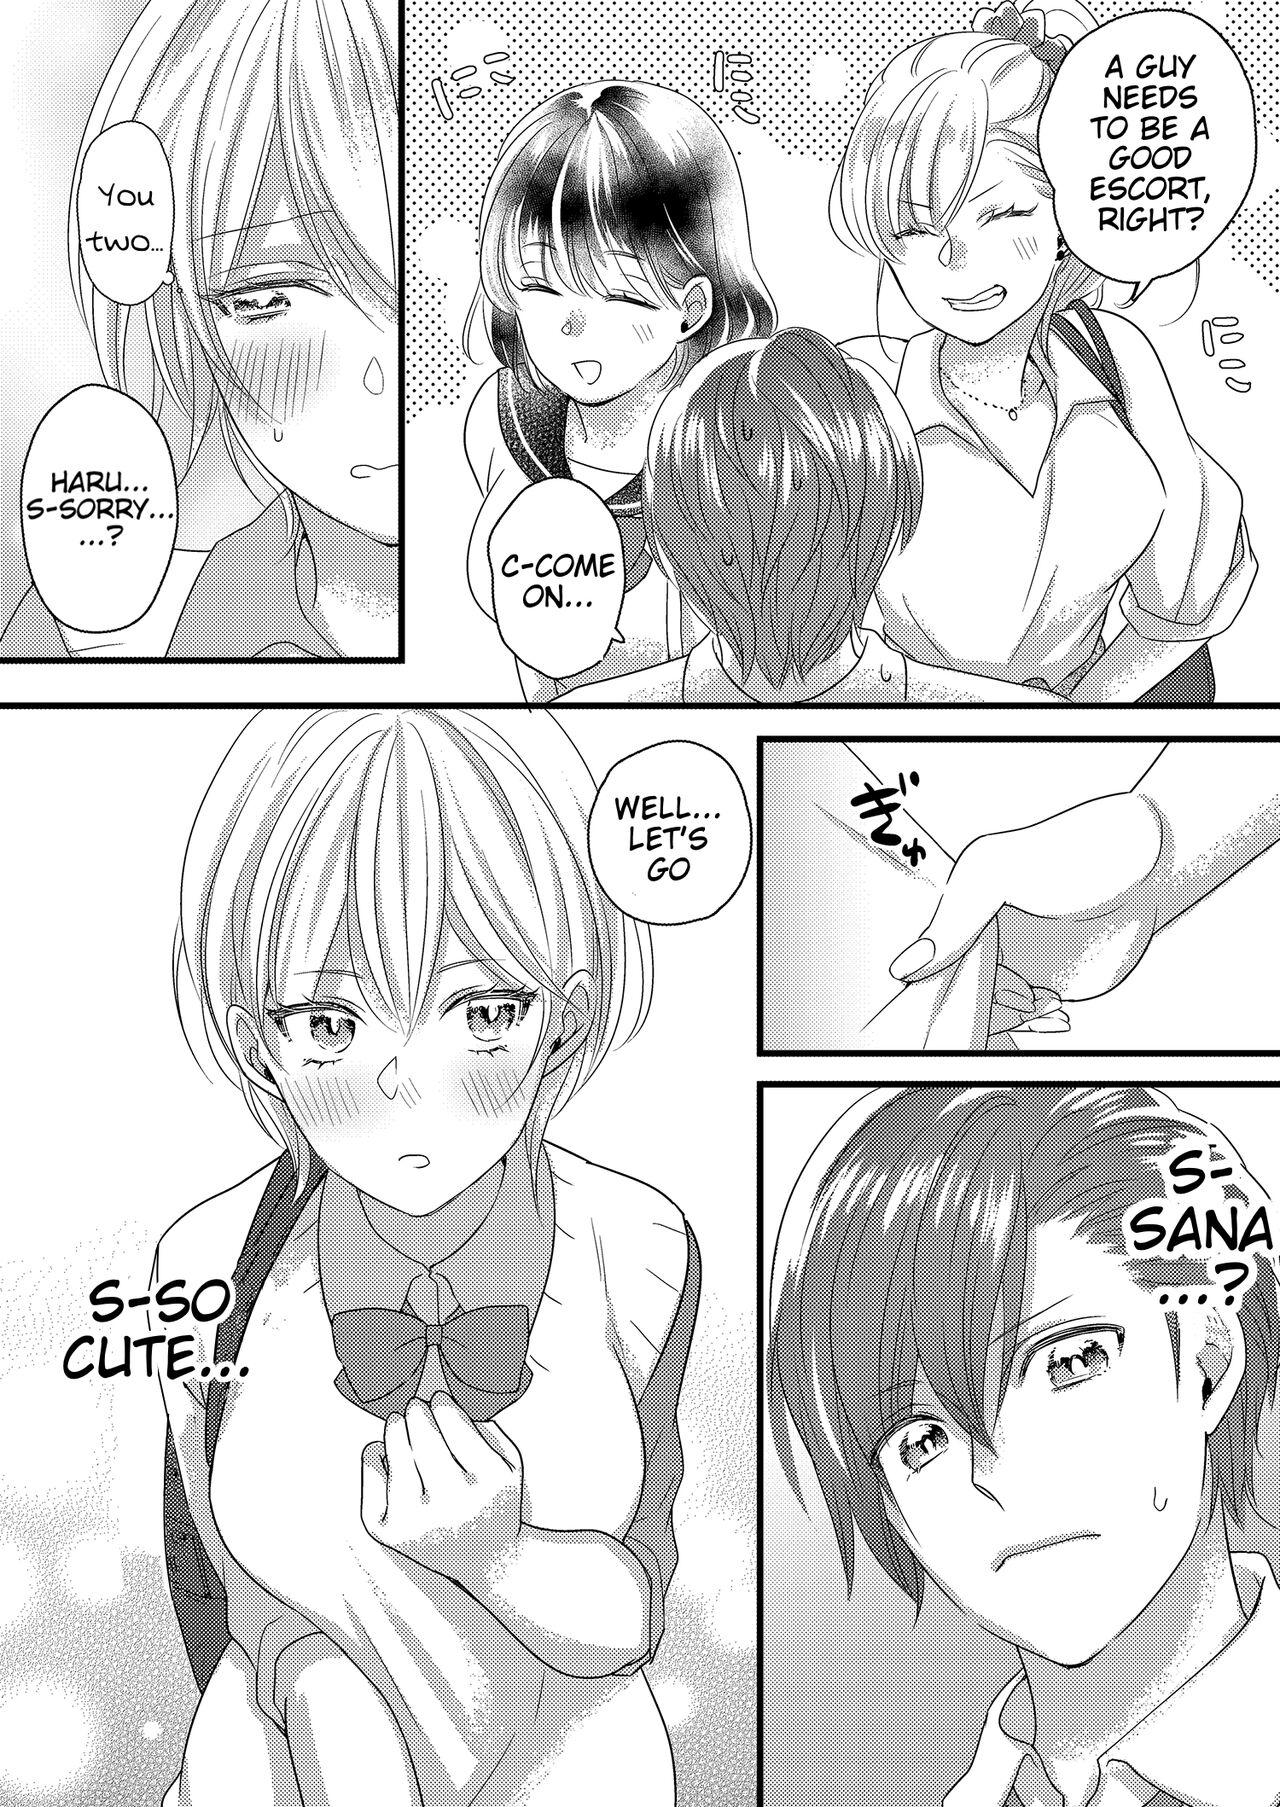 Buttplug Haru and Sana ～Love Connected Through Cosplay～ - Original Cum Swallow - Page 2